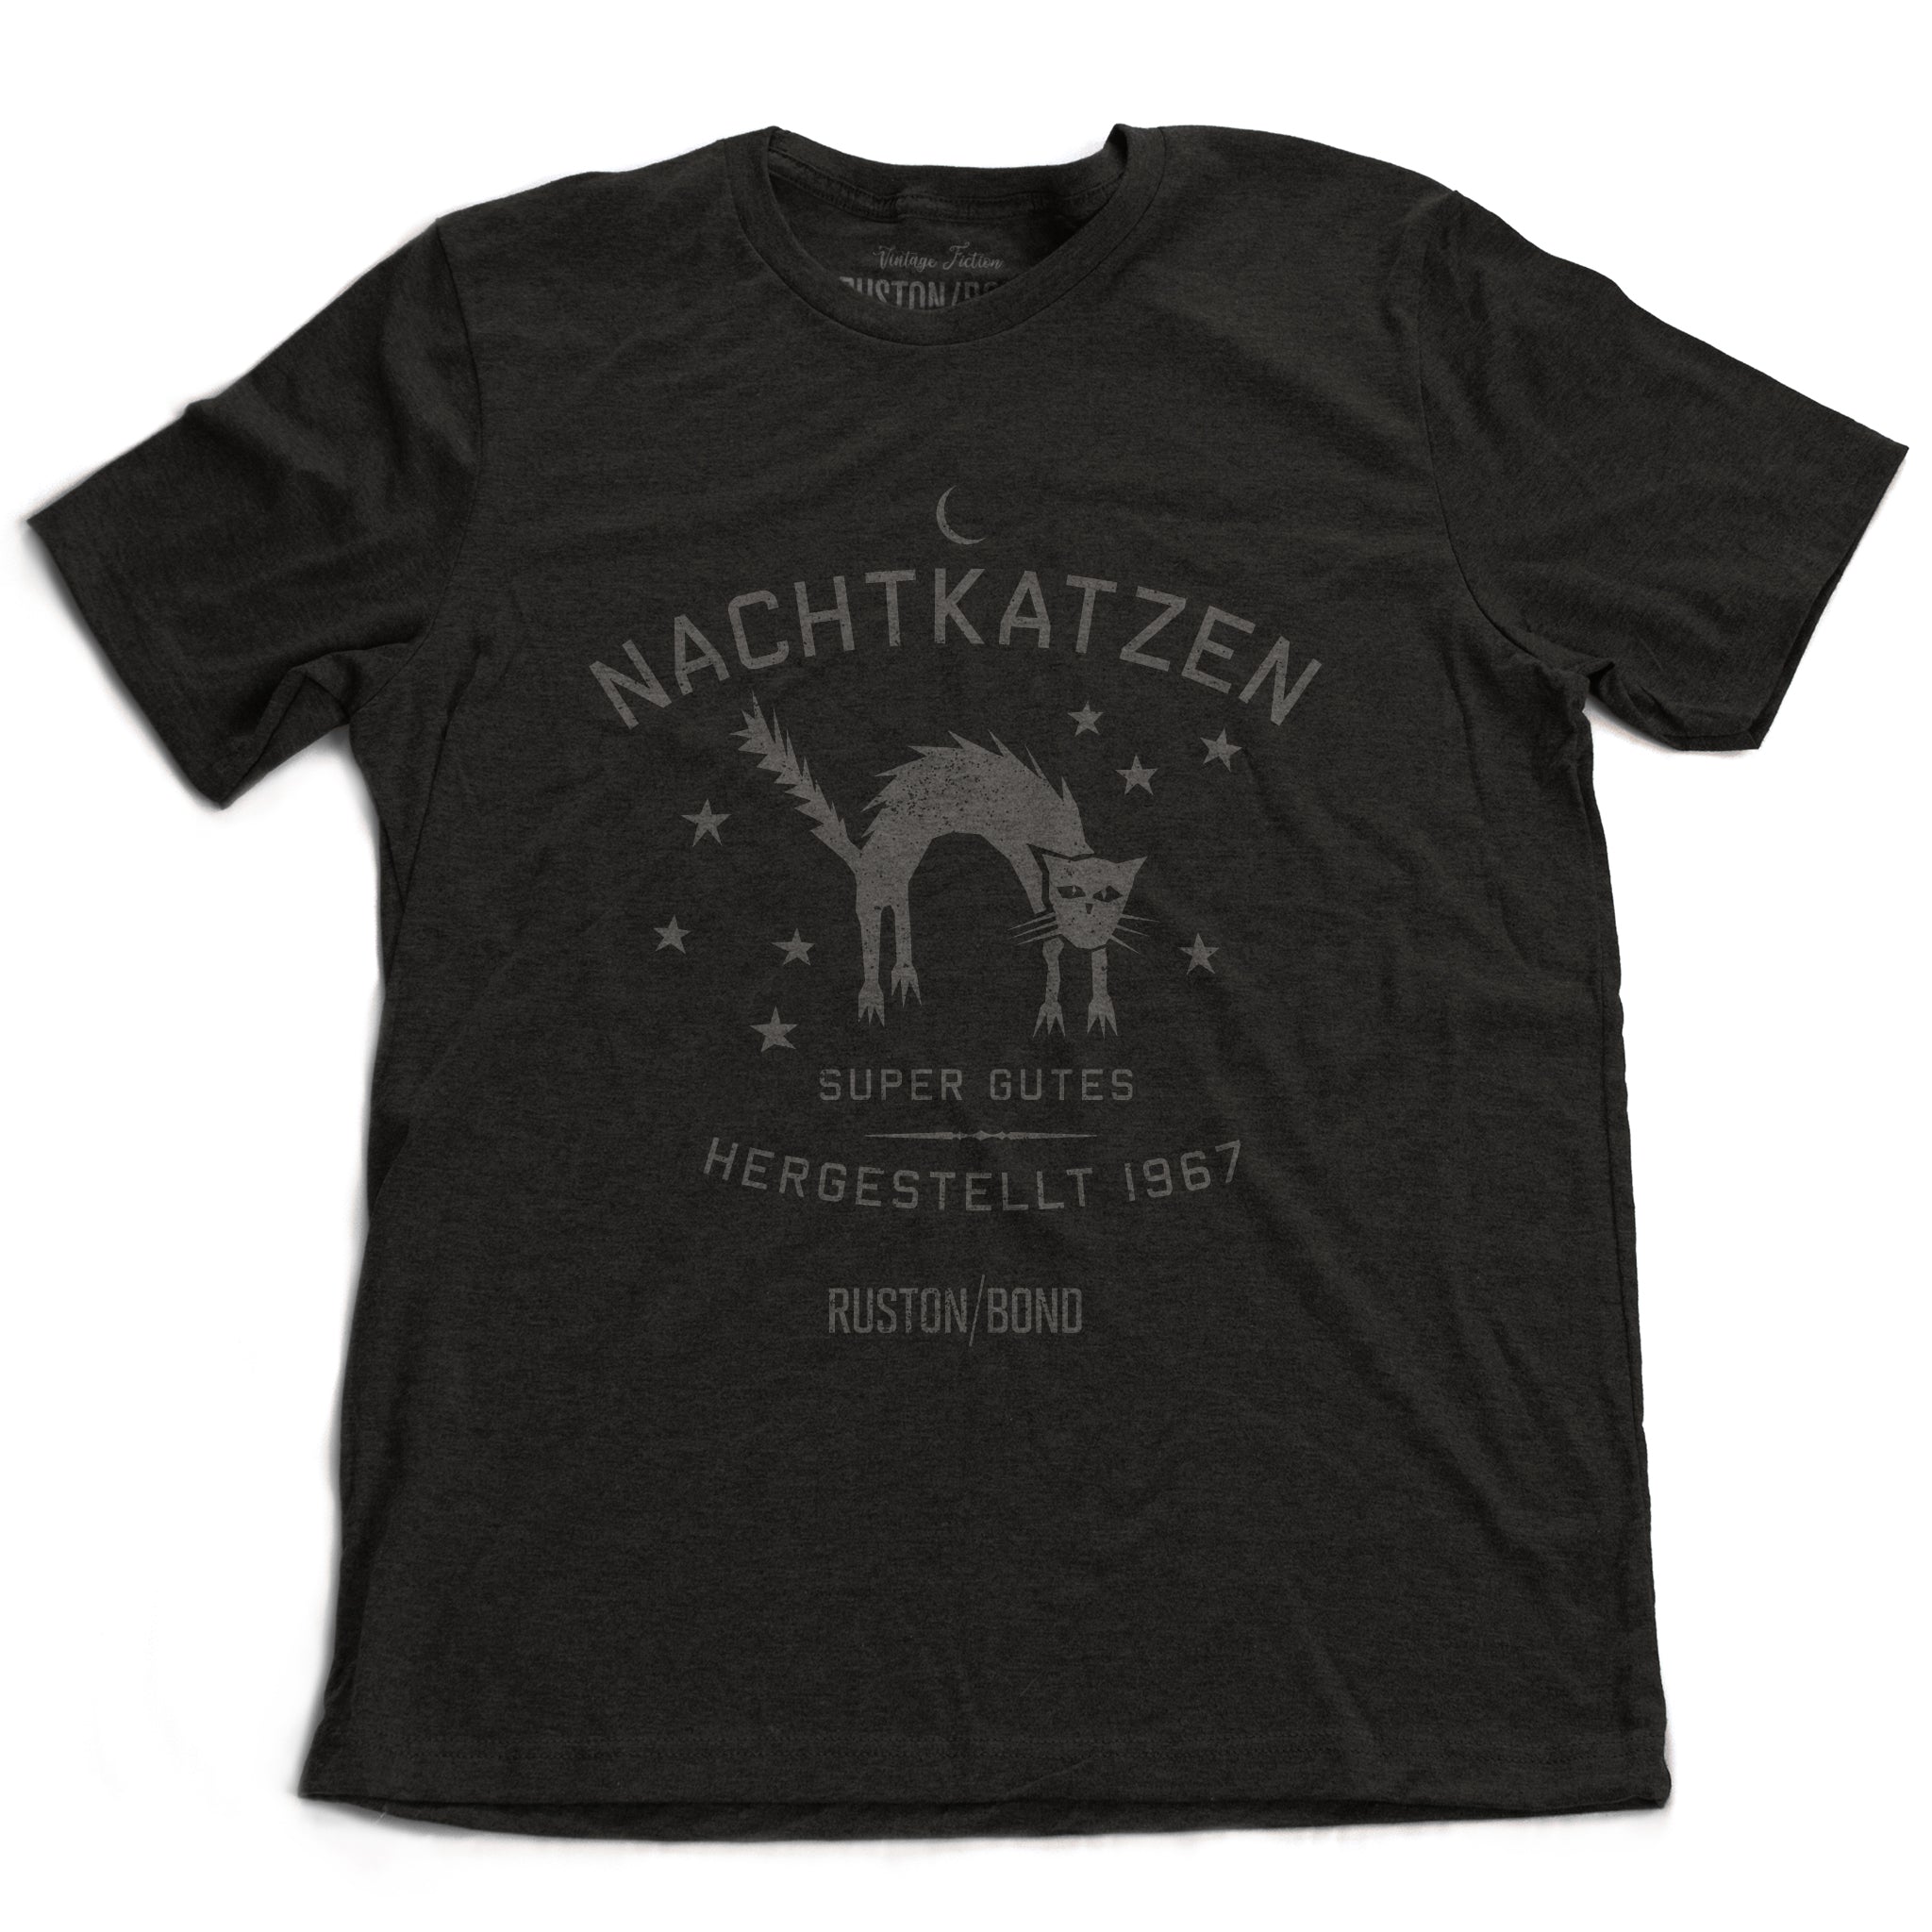 A vintage-inspired retro design graphic t-shirt in Dark Gray Heather, featuring the image of an arched cat among stars, and the German text “NACHTKATZEN, Super Gutes” — translating to “Night Cats, super good” and the year 1967, with the Ruston/Bond logo beneath. From wolfsaint.net